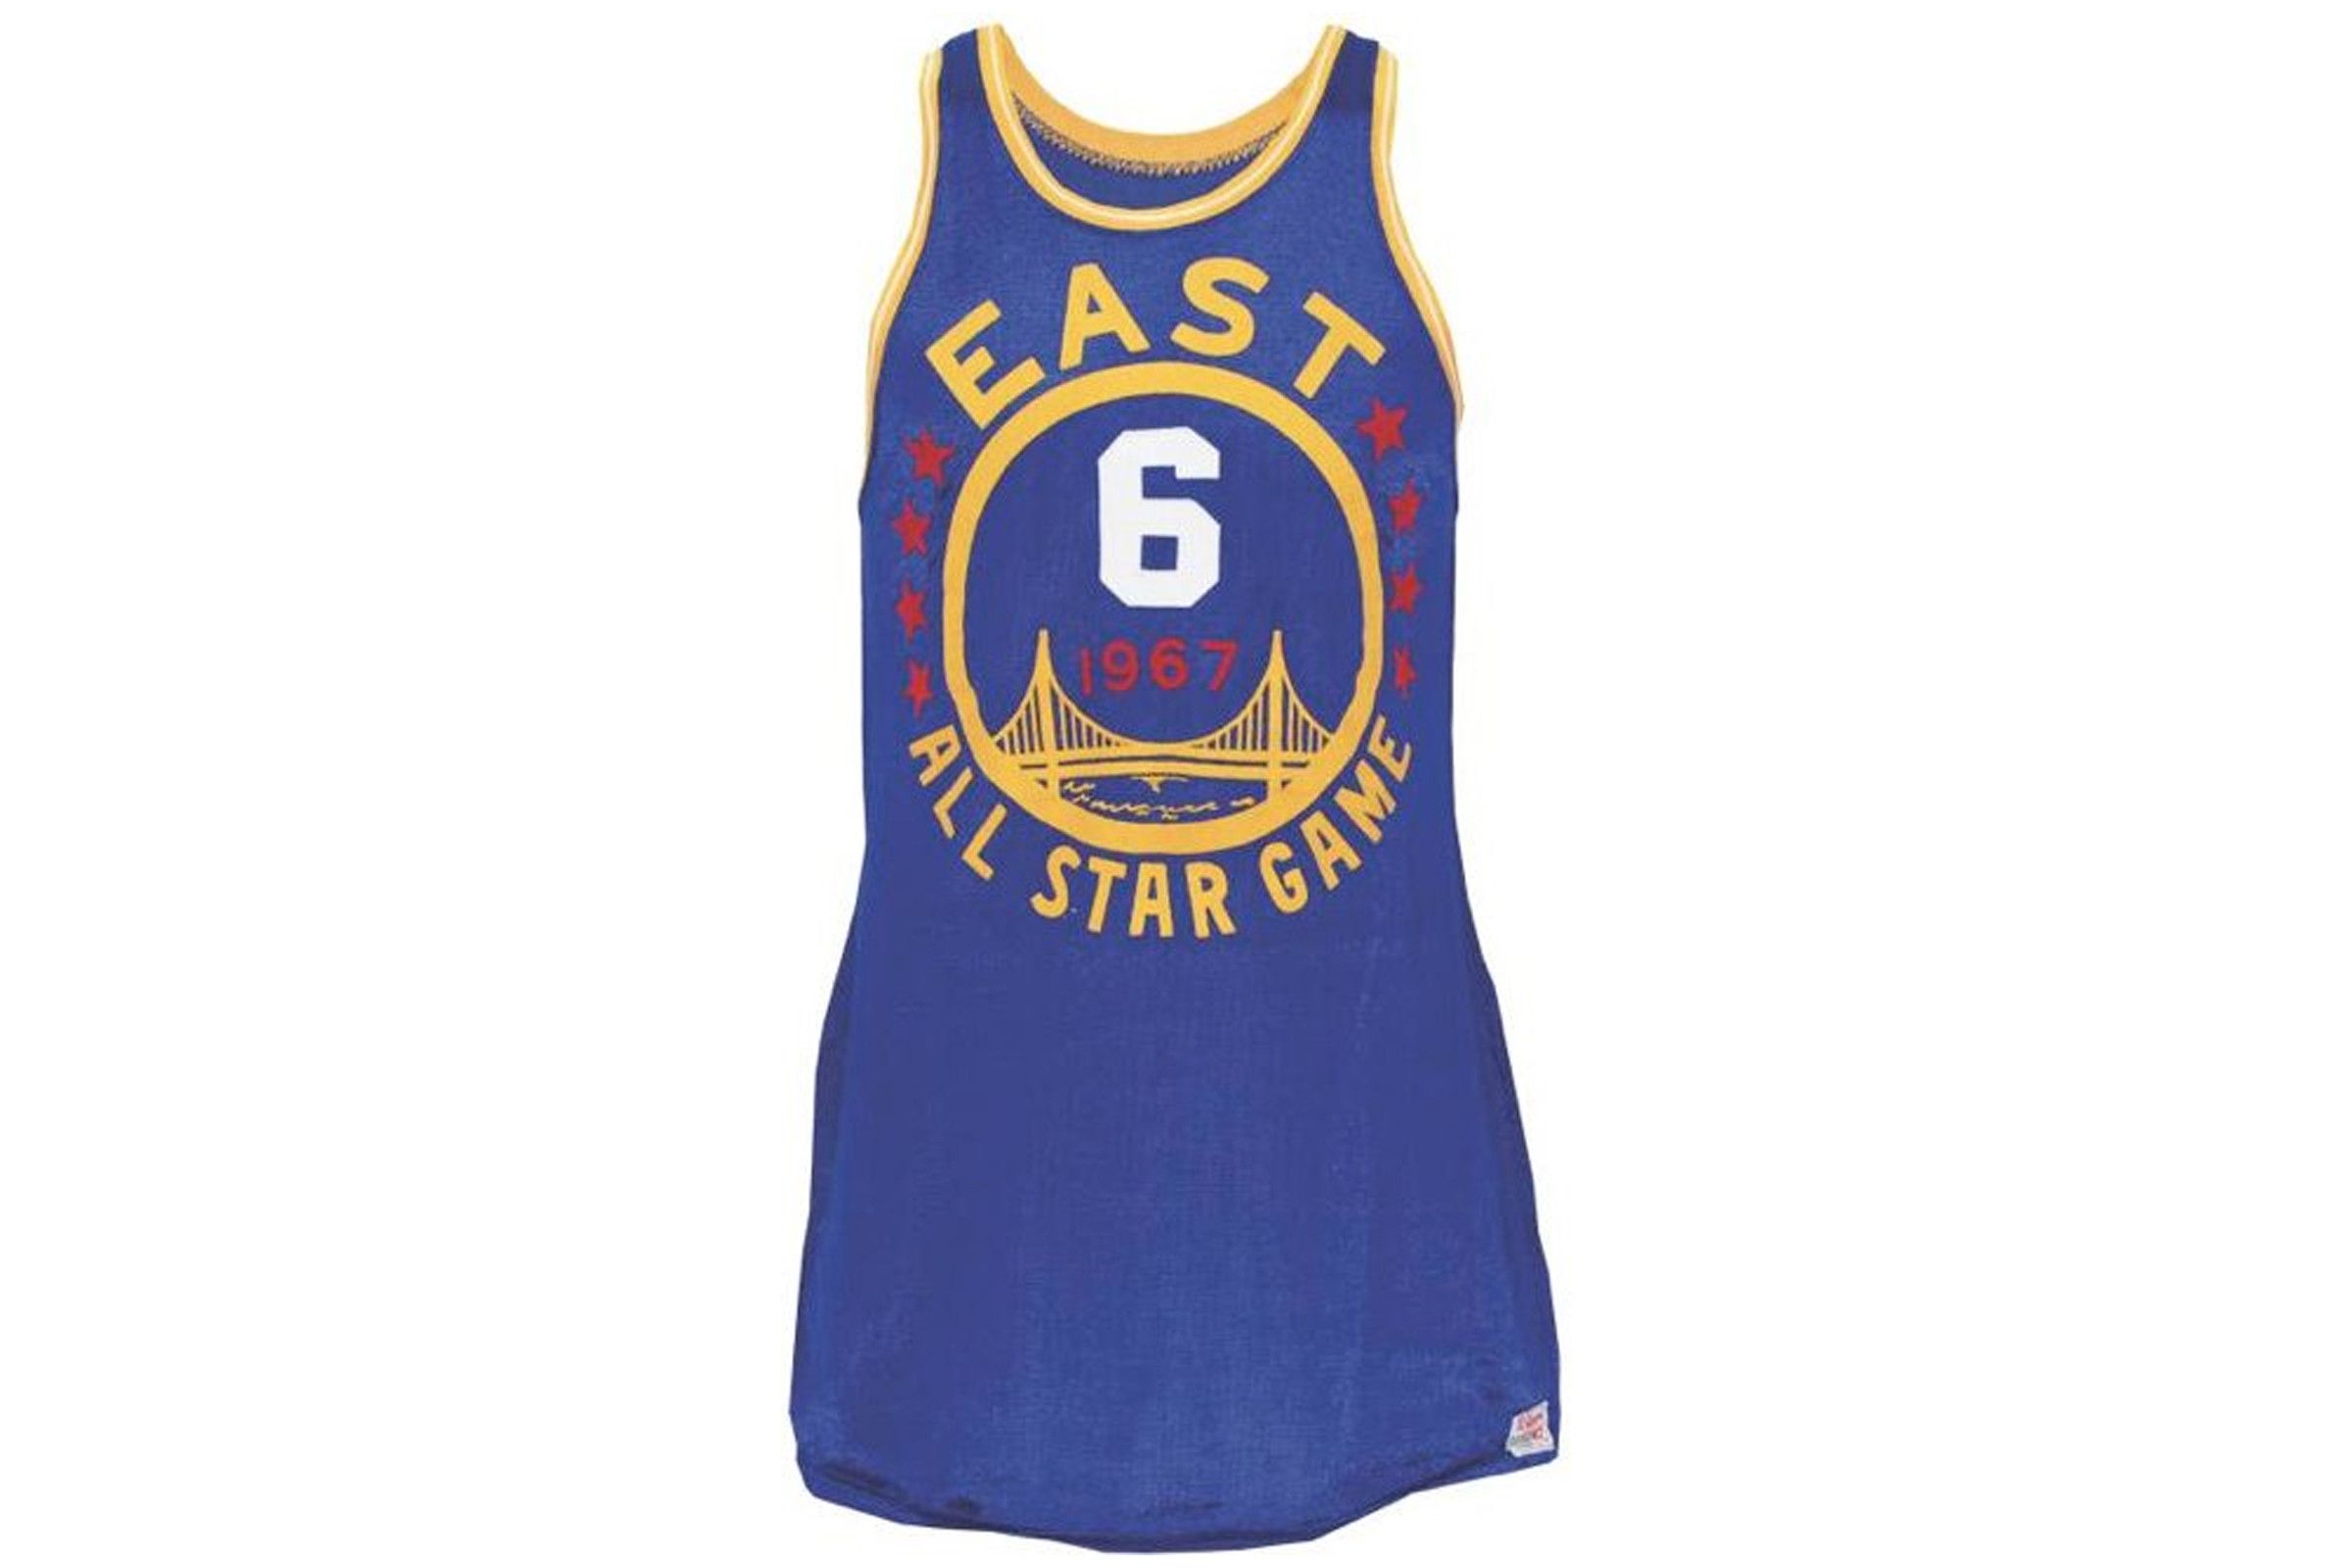 Looking Back at the History of NBA All-Star Uniforms